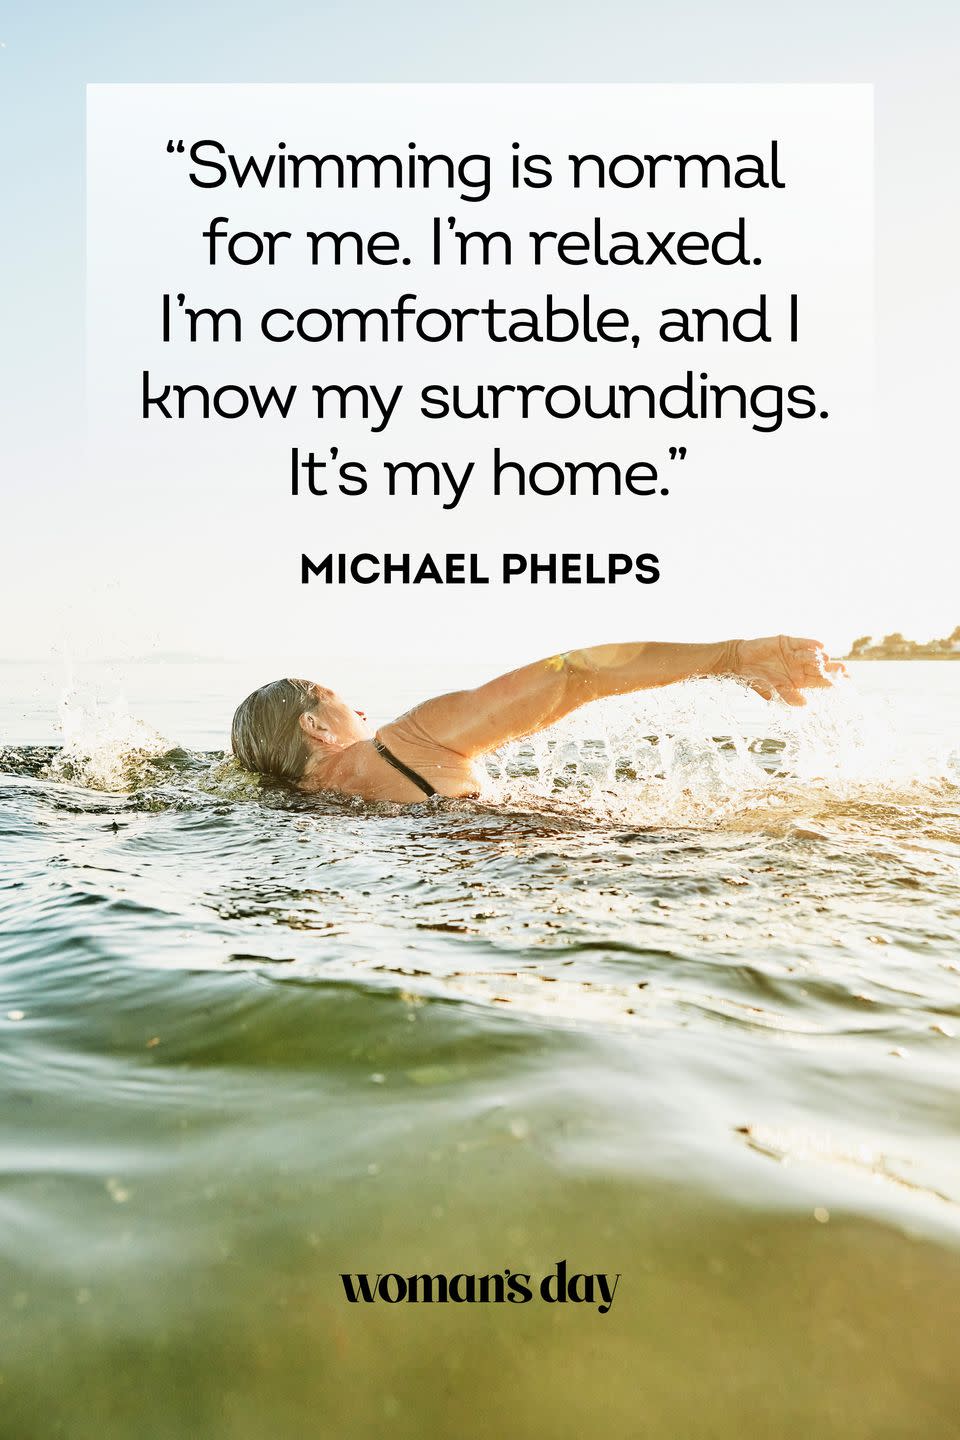 <p>“Swimming is normal for me. I’m relaxed. I’m comfortable, and I know my surroundings. It’s my home.”</p>